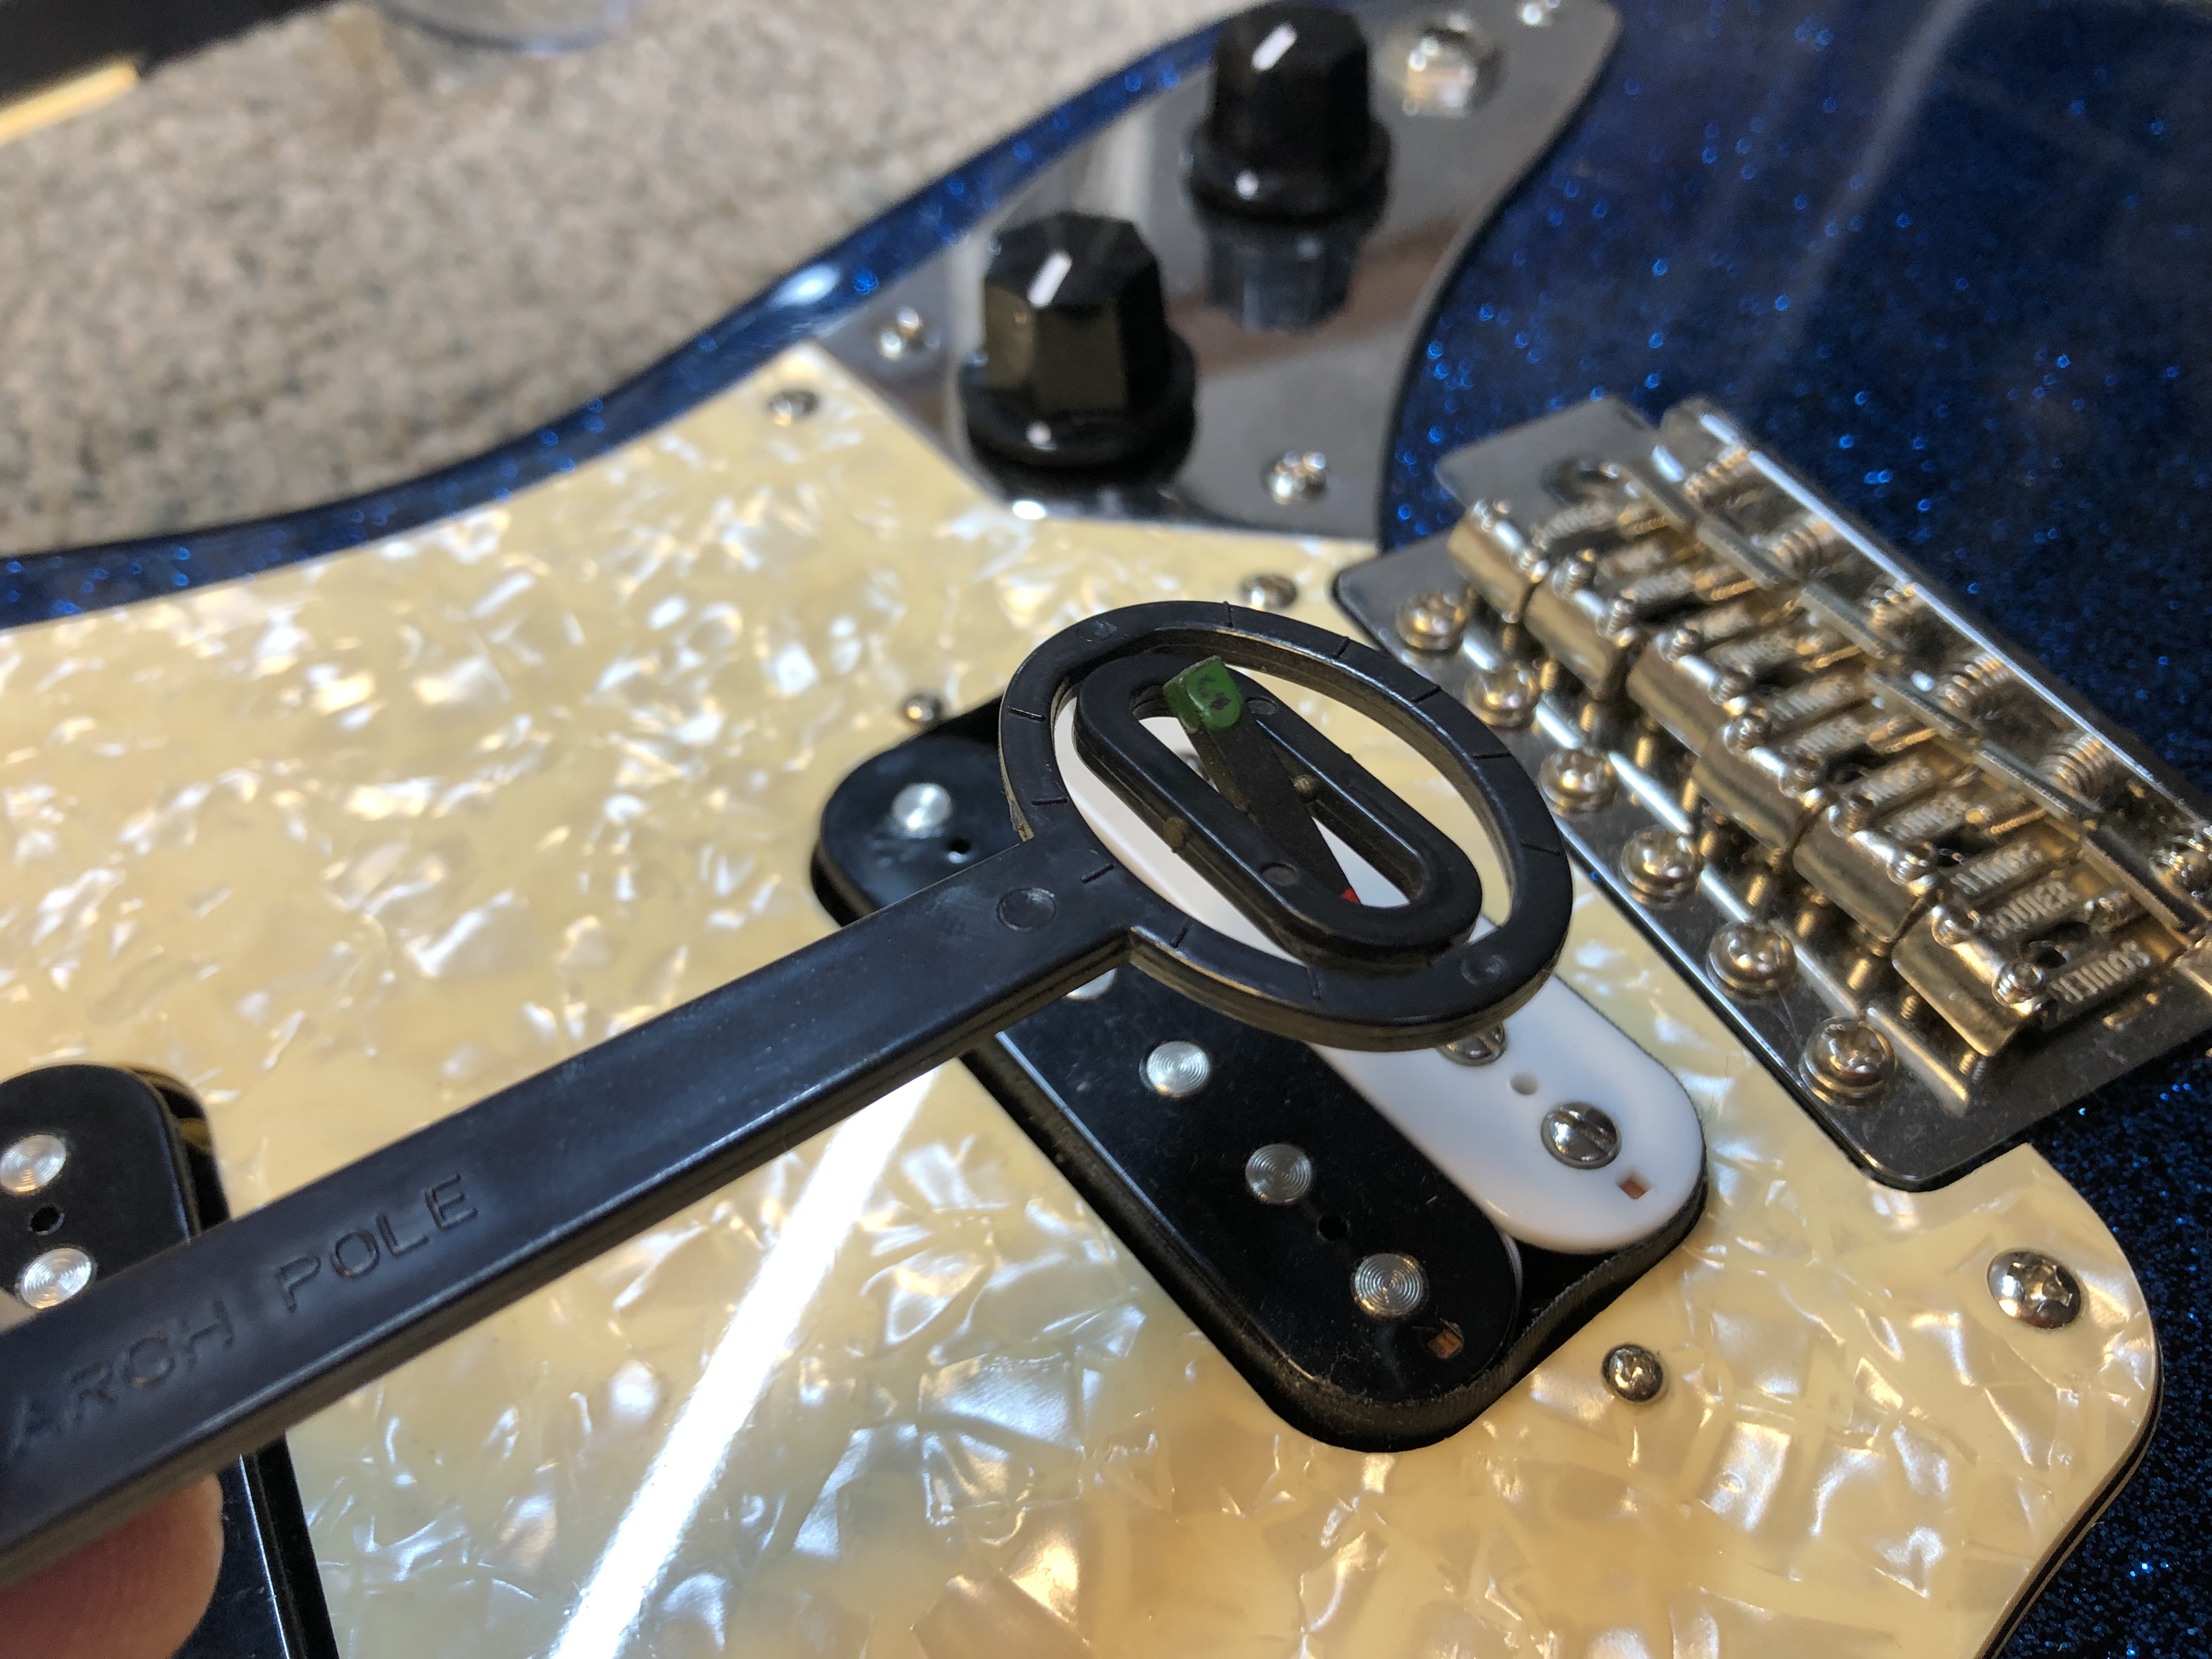 Setup, Bone Nut and Pickup Repair on Squire Super-Sonic